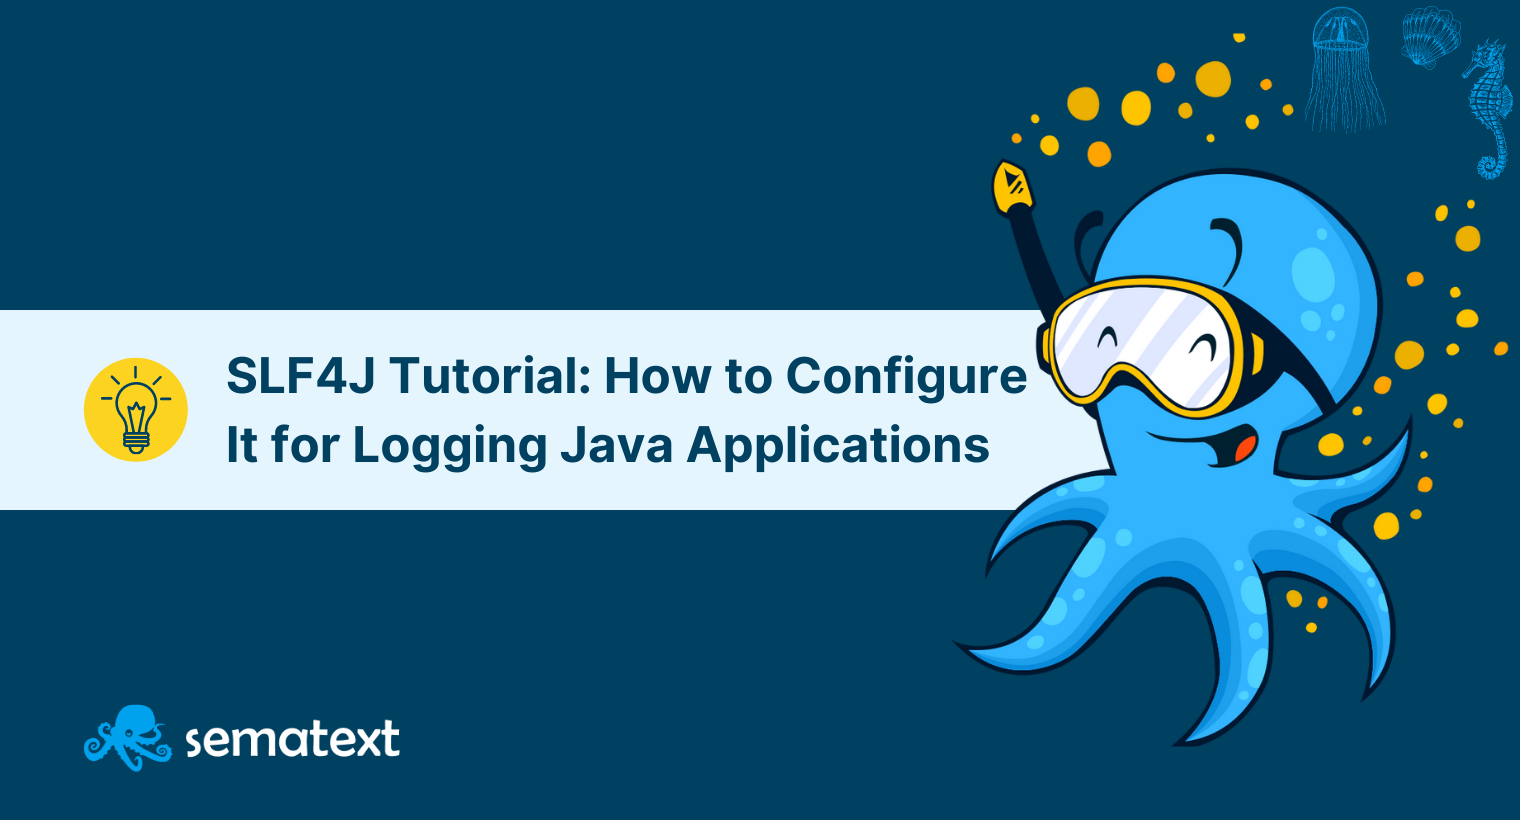 SLF4J Tutorial: Example of How to Configure It for Logging Java Applications